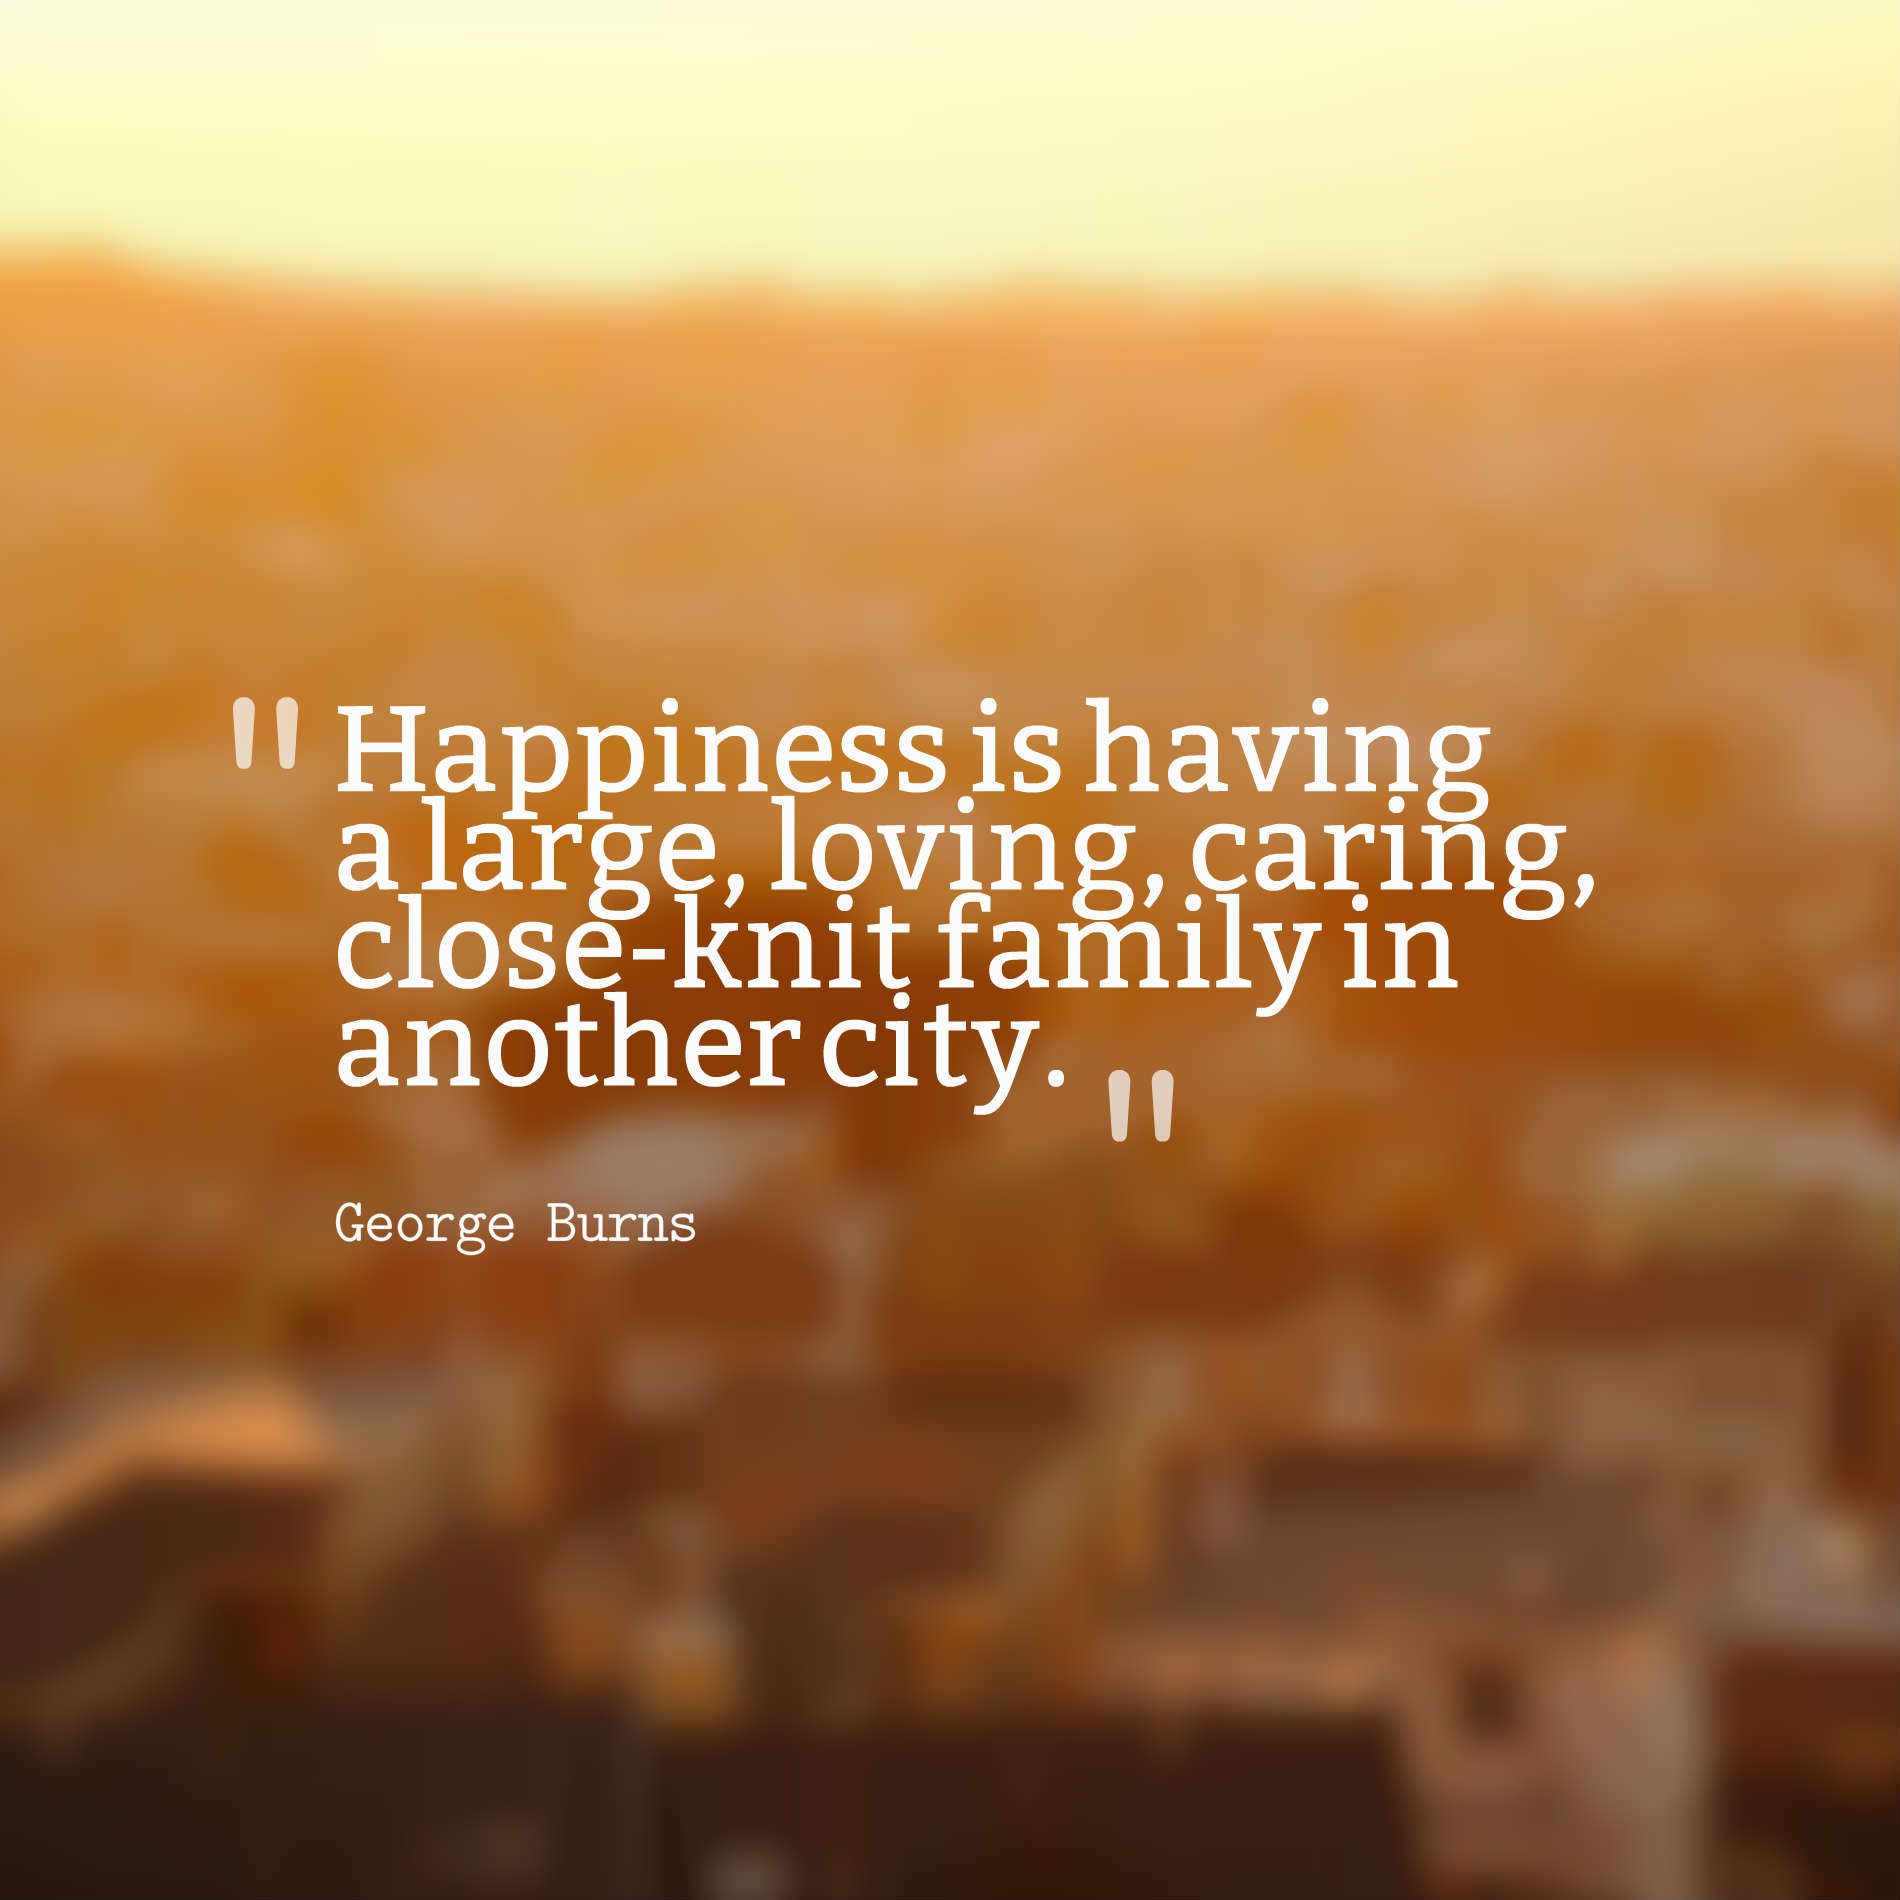 Happiness is having a large, loving, caring, close-knit family in another city.